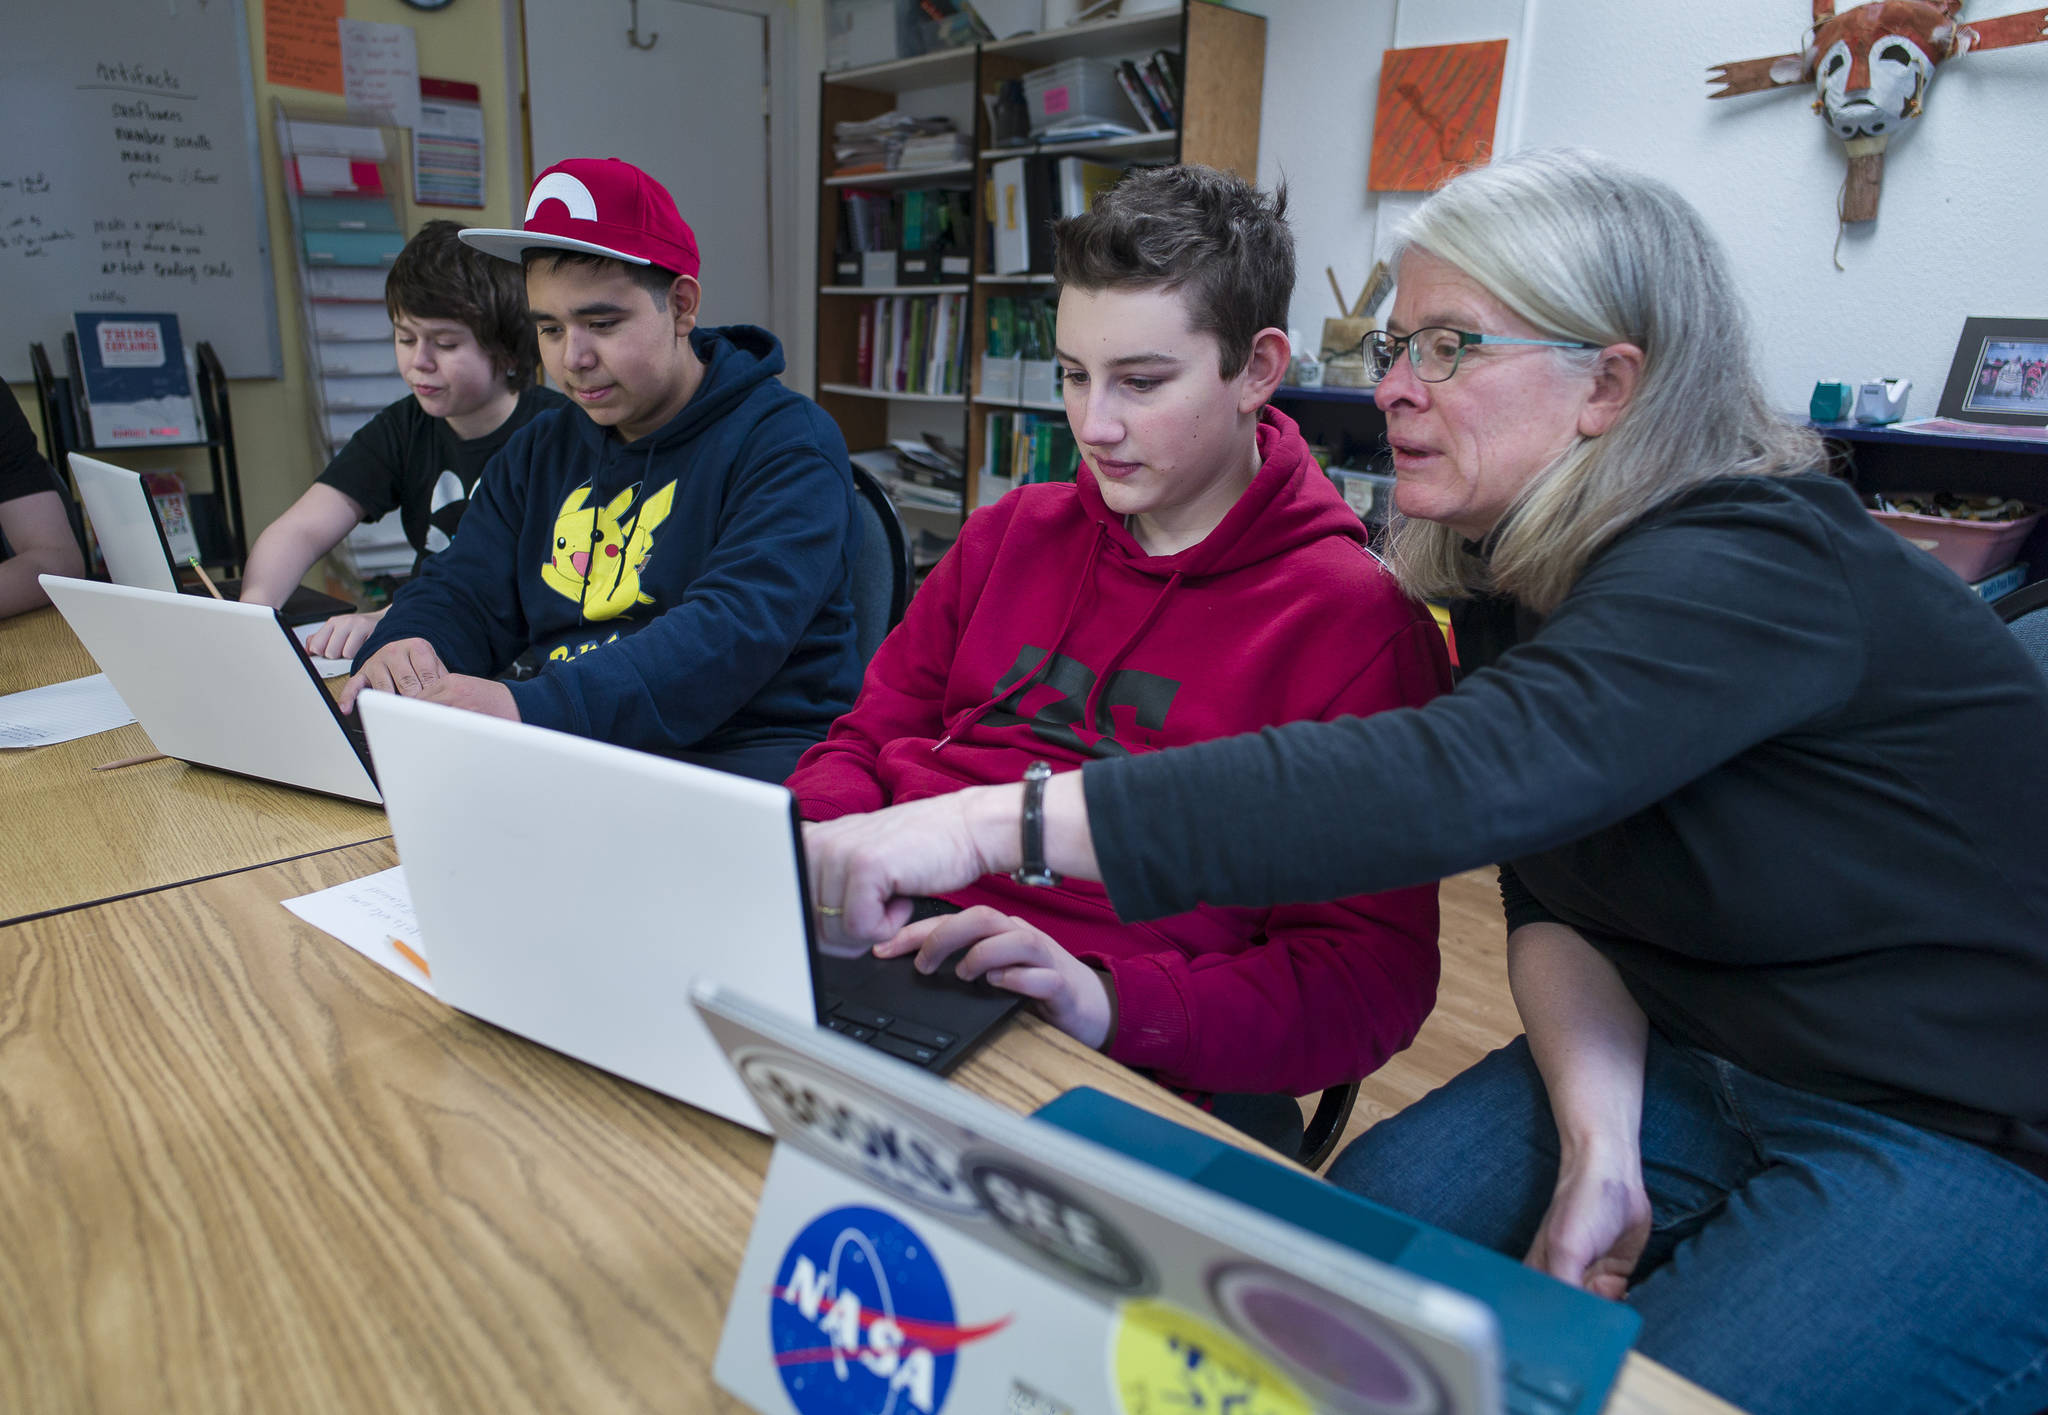 Math Specialist Brenda Taylor helps eighth-graders Fisher Lee, right, and Jorge Cordero, center, and sixth-grader Joshua Kessler with their coding project at the Juneau Community Charter School on Wednesday, Jan. 10, 2018. The school is celebrating its 20th Anniversary with a dinner and presentation in the Juneau-Douglas High School commons on Saturday from 5:30 to 9 p.m. (Michael Penn | Juneau Empire)